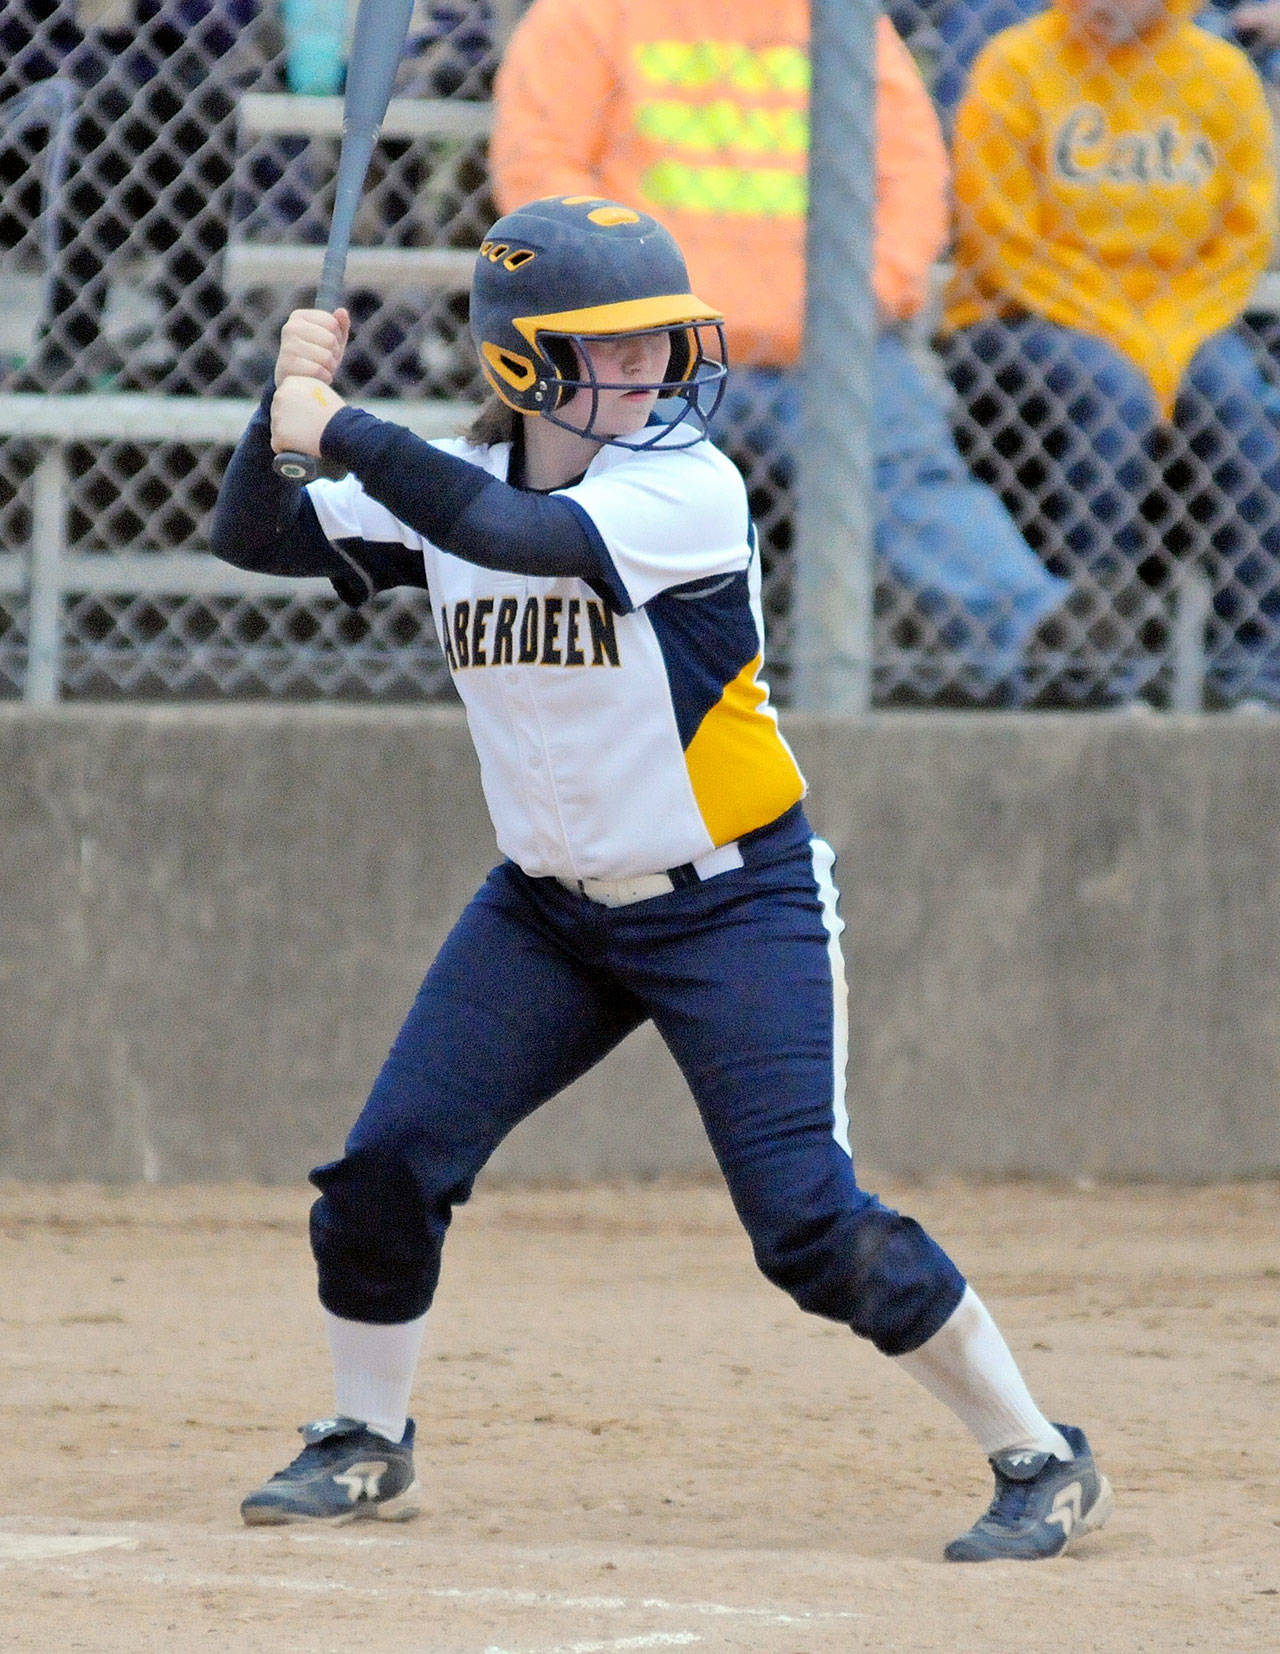 Aberdeen catcher Sierra Hammond was named to the 2A Evergreen All-Conference First Team the league announced on Tuesday. (Ryan Sparks | Grays Harbor News Group)